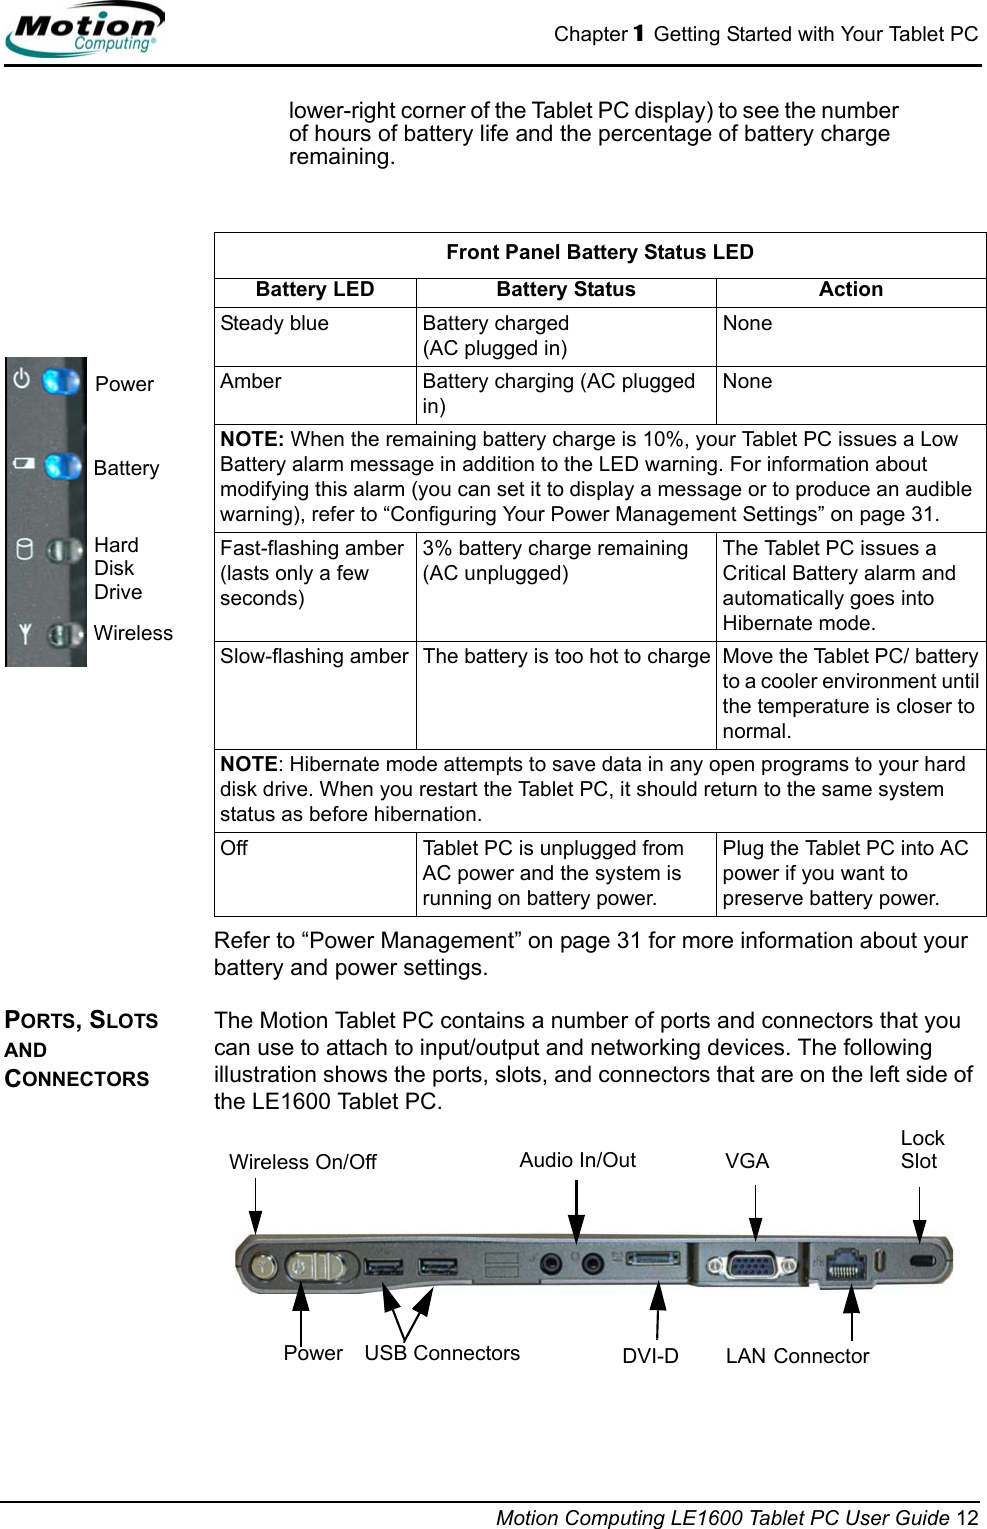 Chapter 1  Getting Started with Your Tablet PCMotion Computing LE1600 Tablet PC User Guide 12lower-right corner of the Tablet PC display) to see the number of hours of battery life and the percentage of battery charge remaining.Refer to “Power Management” on page 31 for more information about your battery and power settings. PORTS, SLOTS AND CONNECTORSThe Motion Tablet PC contains a number of ports and connectors that you can use to attach to input/output and networking devices. The following illustration shows the ports, slots, and connectors that are on the left side of the LE1600 Tablet PC.PowerBatteryHard DiskDriveWirelessFront Panel Battery Status LEDBattery LED Battery Status ActionSteady blue Battery charged(AC plugged in)NoneAmber Battery charging (AC plugged in)NoneNOTE: When the remaining battery charge is 10%, your Tablet PC issues a Low Battery alarm message in addition to the LED warning. For information about modifying this alarm (you can set it to display a message or to produce an audible warning), refer to “Configuring Your Power Management Settings” on page 31.Fast-flashing amber (lasts only a few seconds)3% battery charge remaining(AC unplugged)The Tablet PC issues a Critical Battery alarm and automatically goes into Hibernate mode. Slow-flashing amber The battery is too hot to charge Move the Tablet PC/ battery to a cooler environment until the temperature is closer to normal.NOTE: Hibernate mode attempts to save data in any open programs to your hard disk drive. When you restart the Tablet PC, it should return to the same system status as before hibernation.Off Tablet PC is unplugged from AC power and the system is running on battery power.Plug the Tablet PC into AC power if you want to preserve battery power.LAN ConnectorUSB ConnectorsWireless On/OffPower Audio In/OutDVI-DVGALockSlot